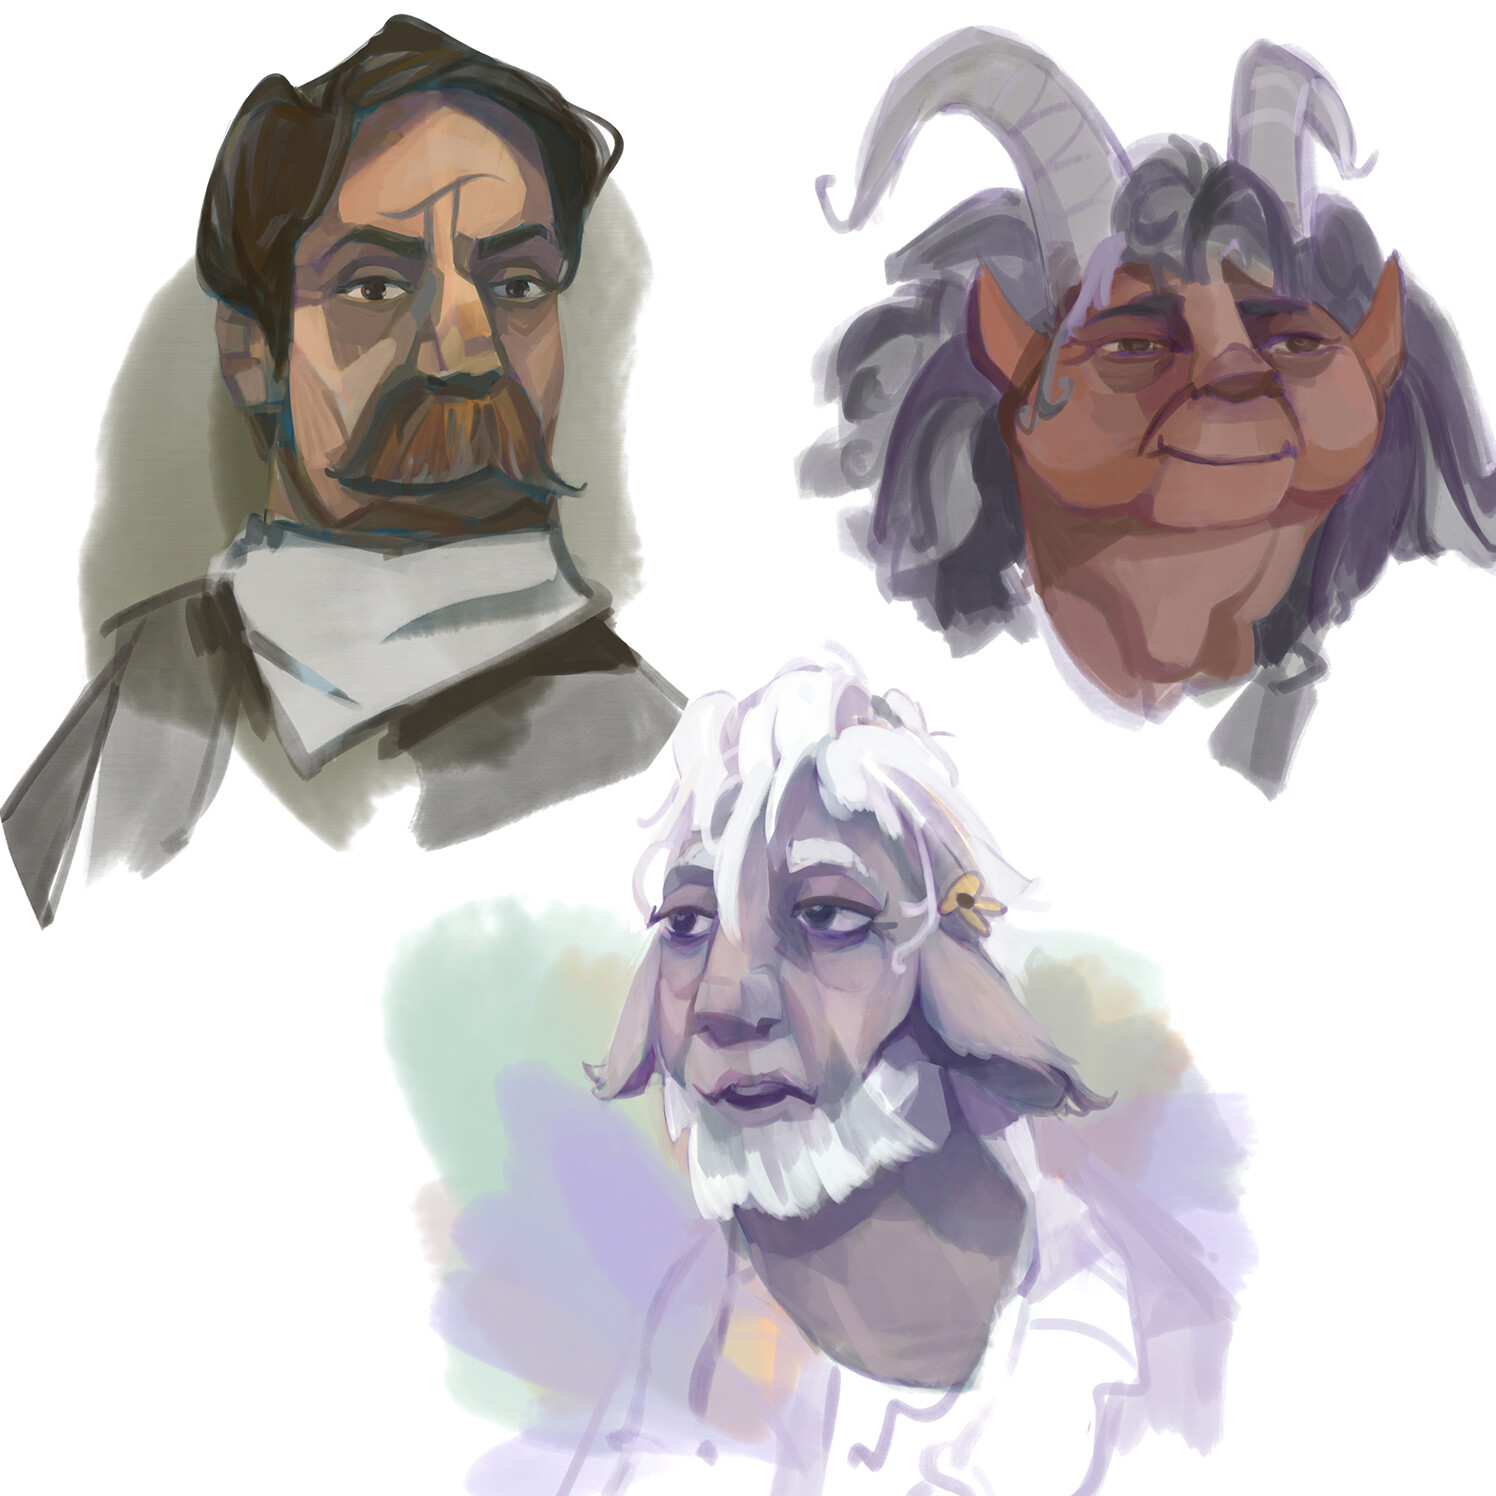 DnD Character Portraits